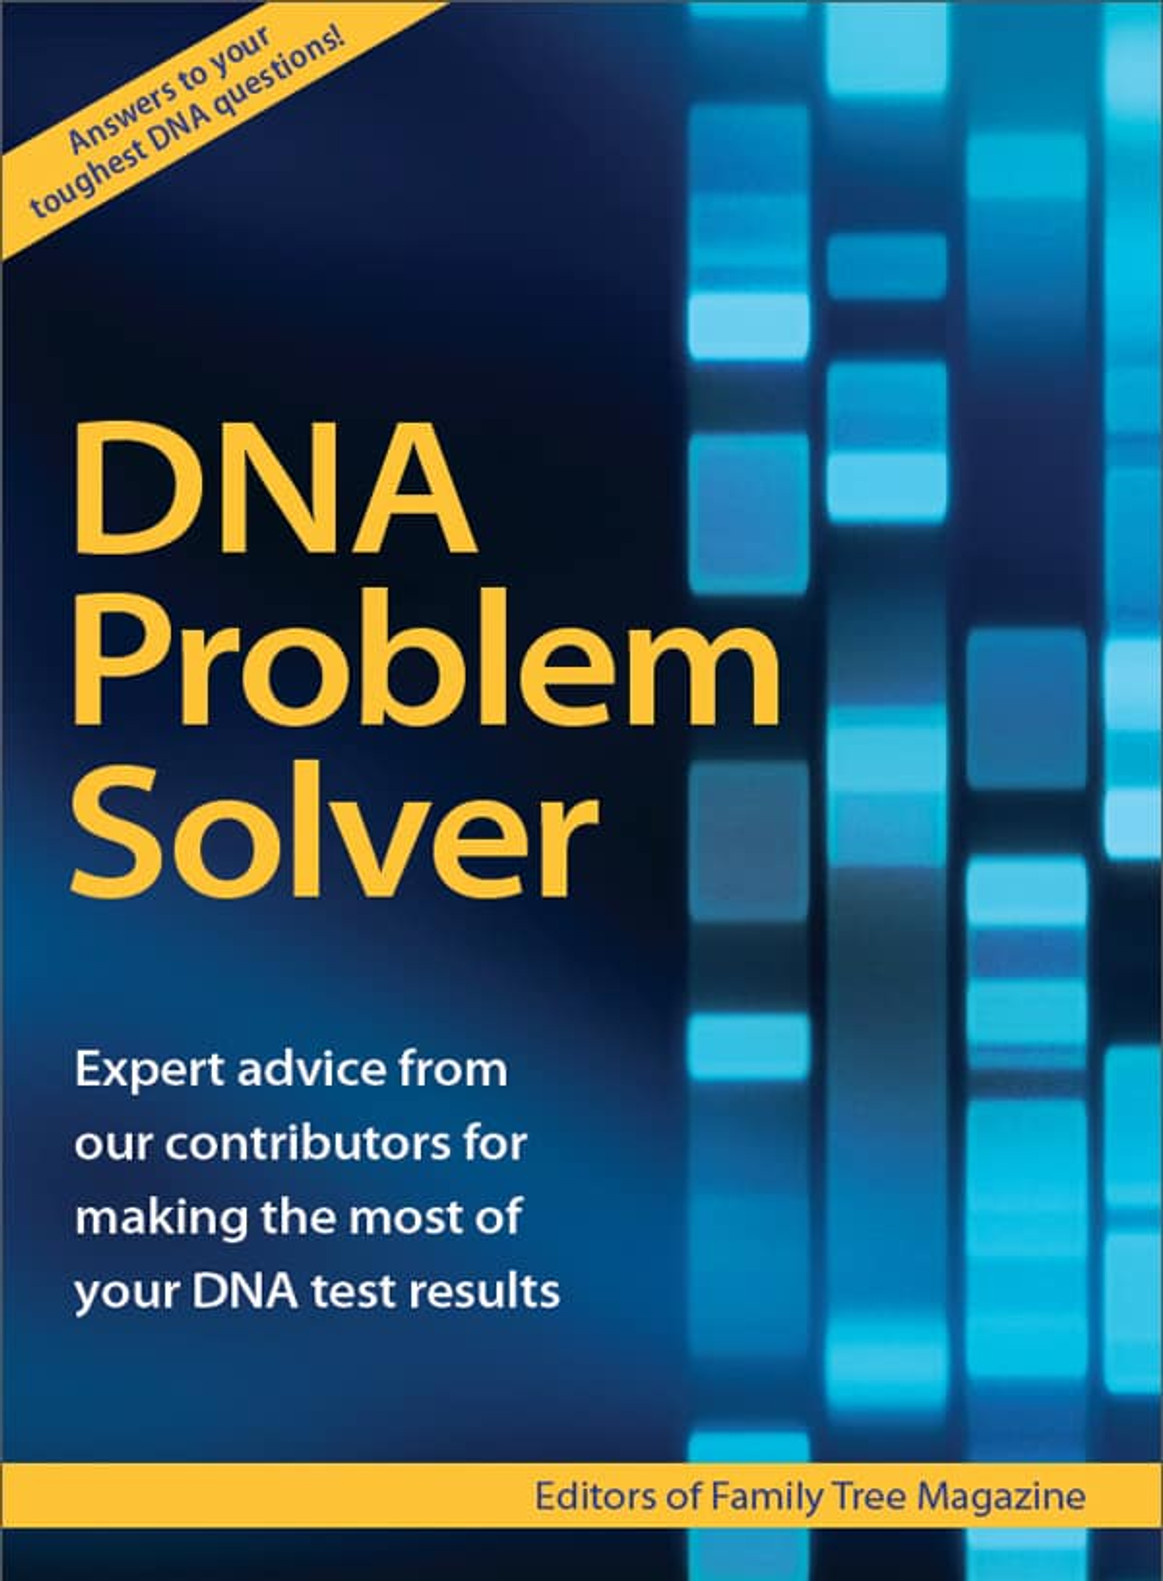 DNA Problem Solver eBook: Expert advice from our contributors on making the most of your DNA test results